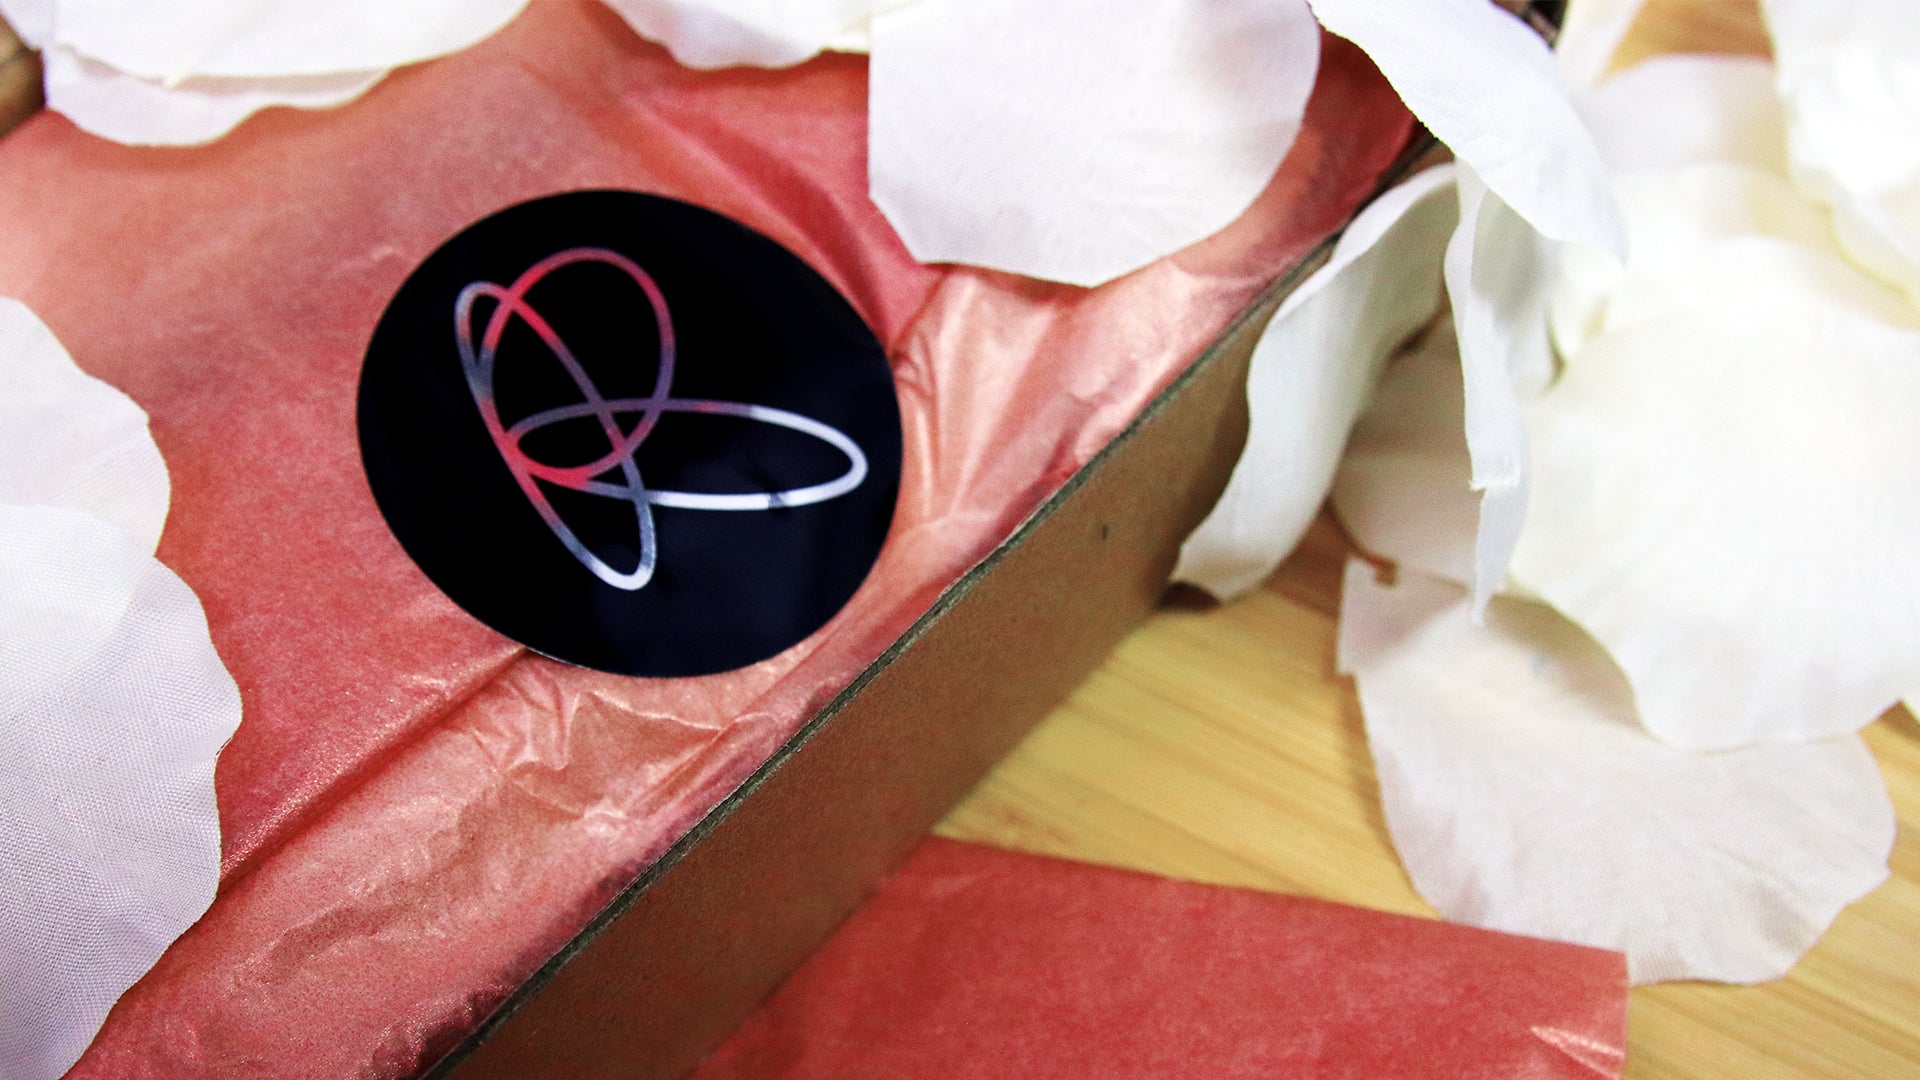 Circle eco-friendly silver logo sticker applied to secure pink wrapping paper